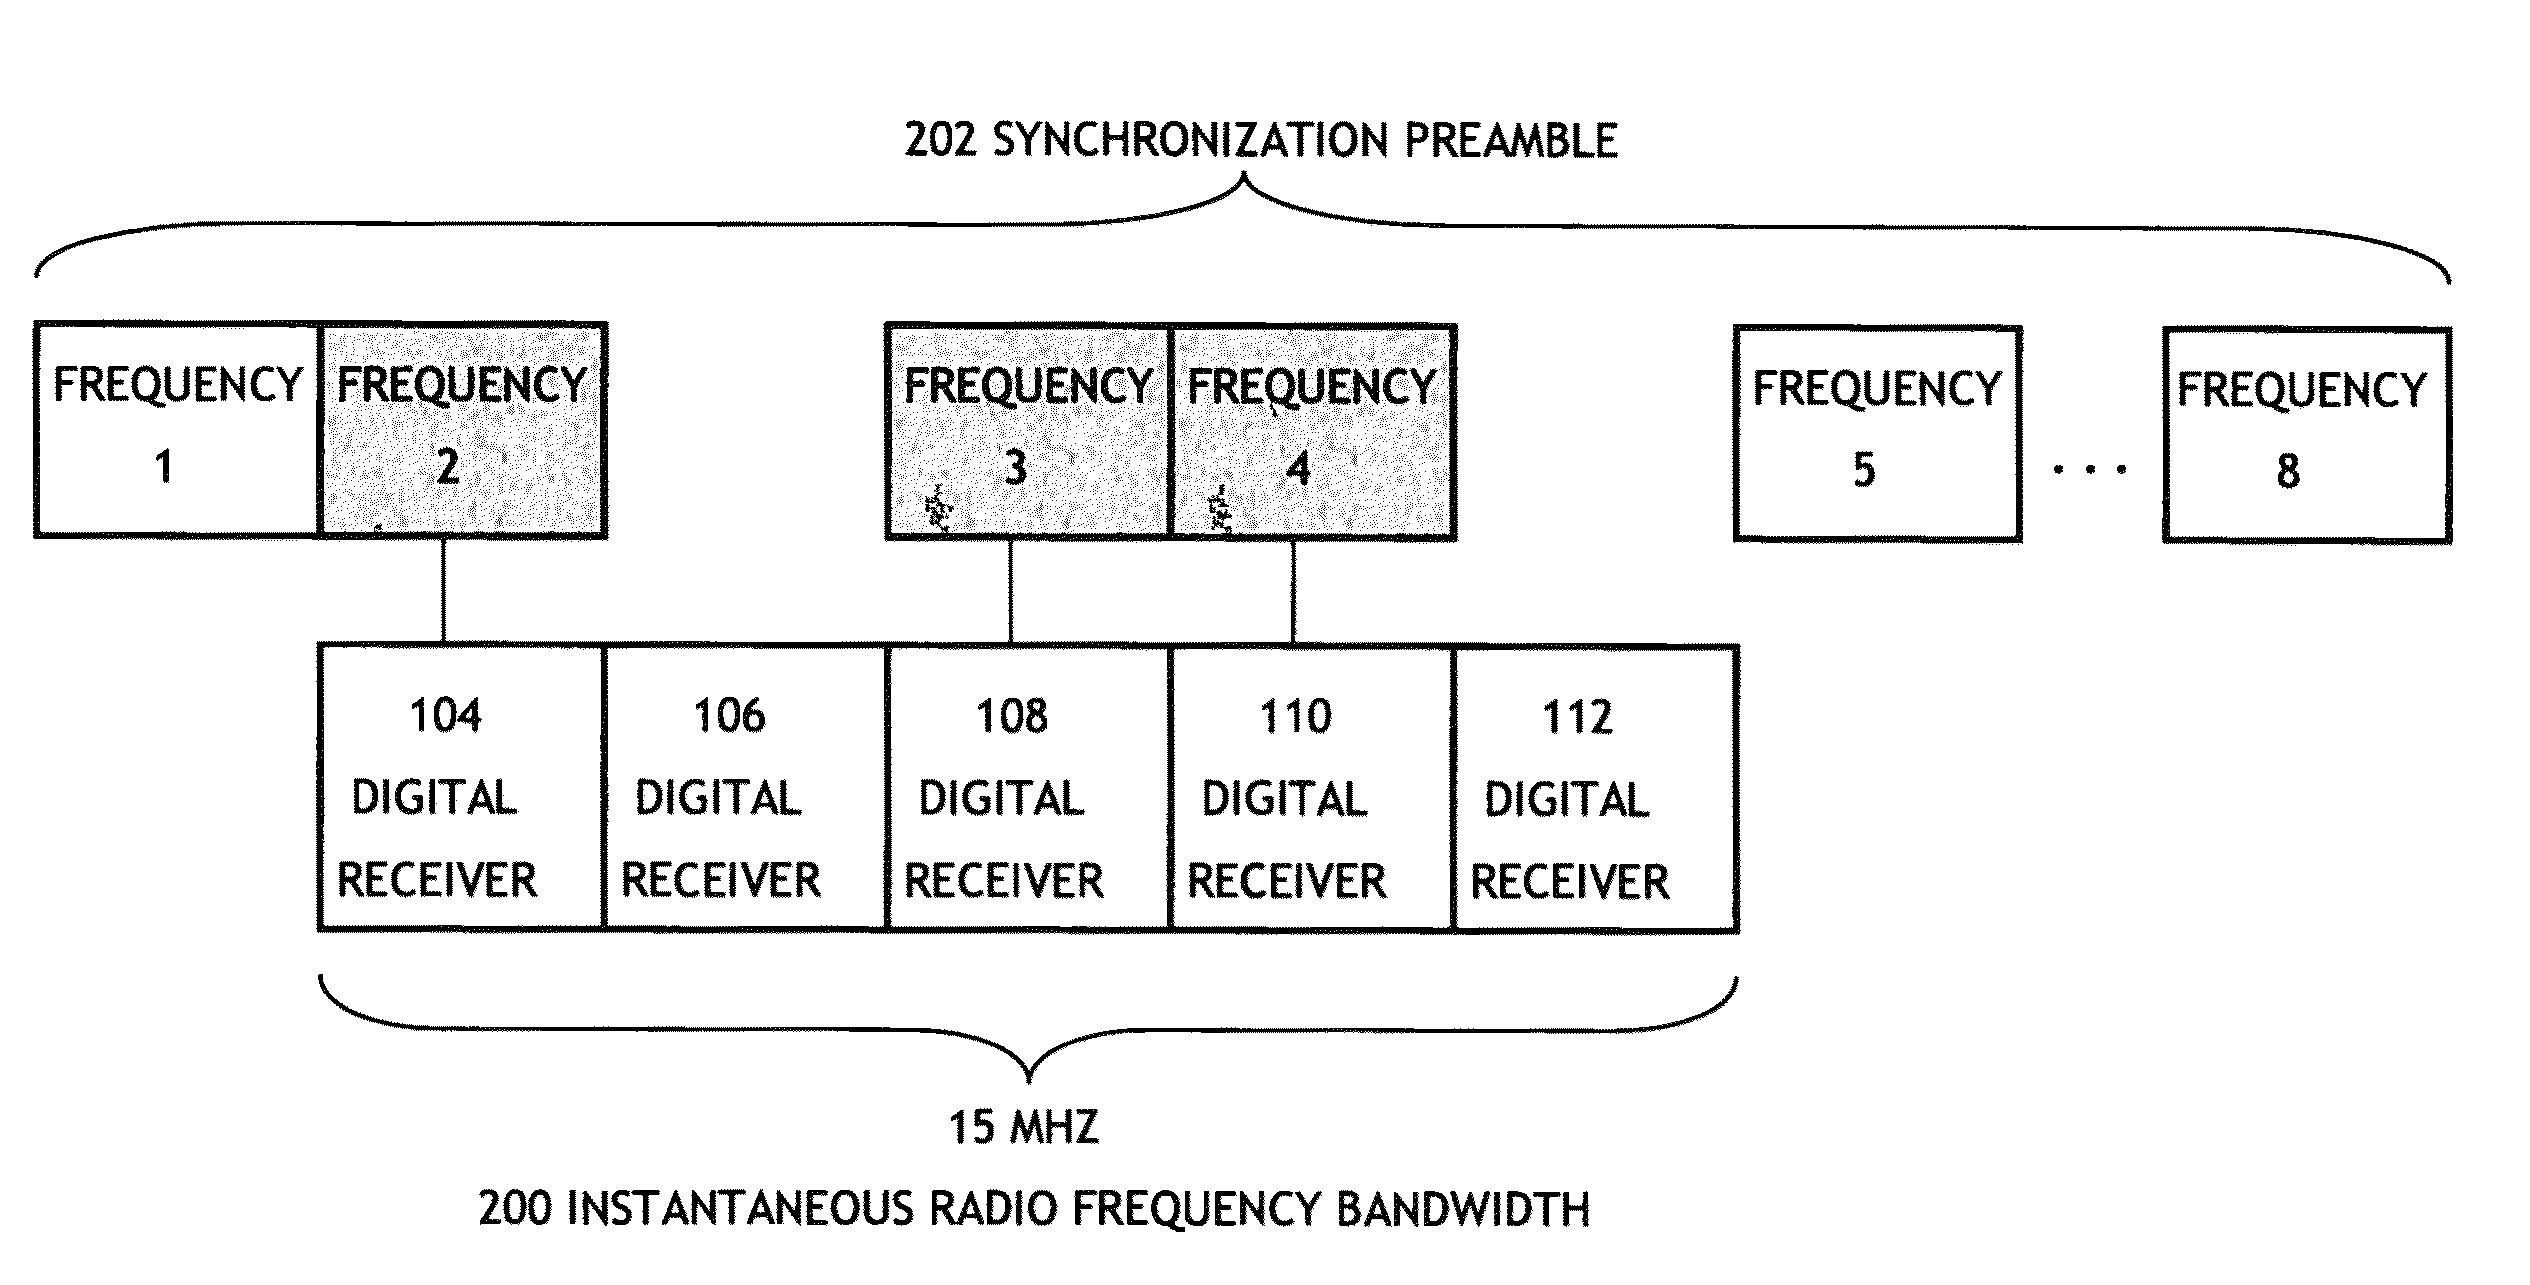 Syncronization frequency diversity reception utilizing a single RF receiver